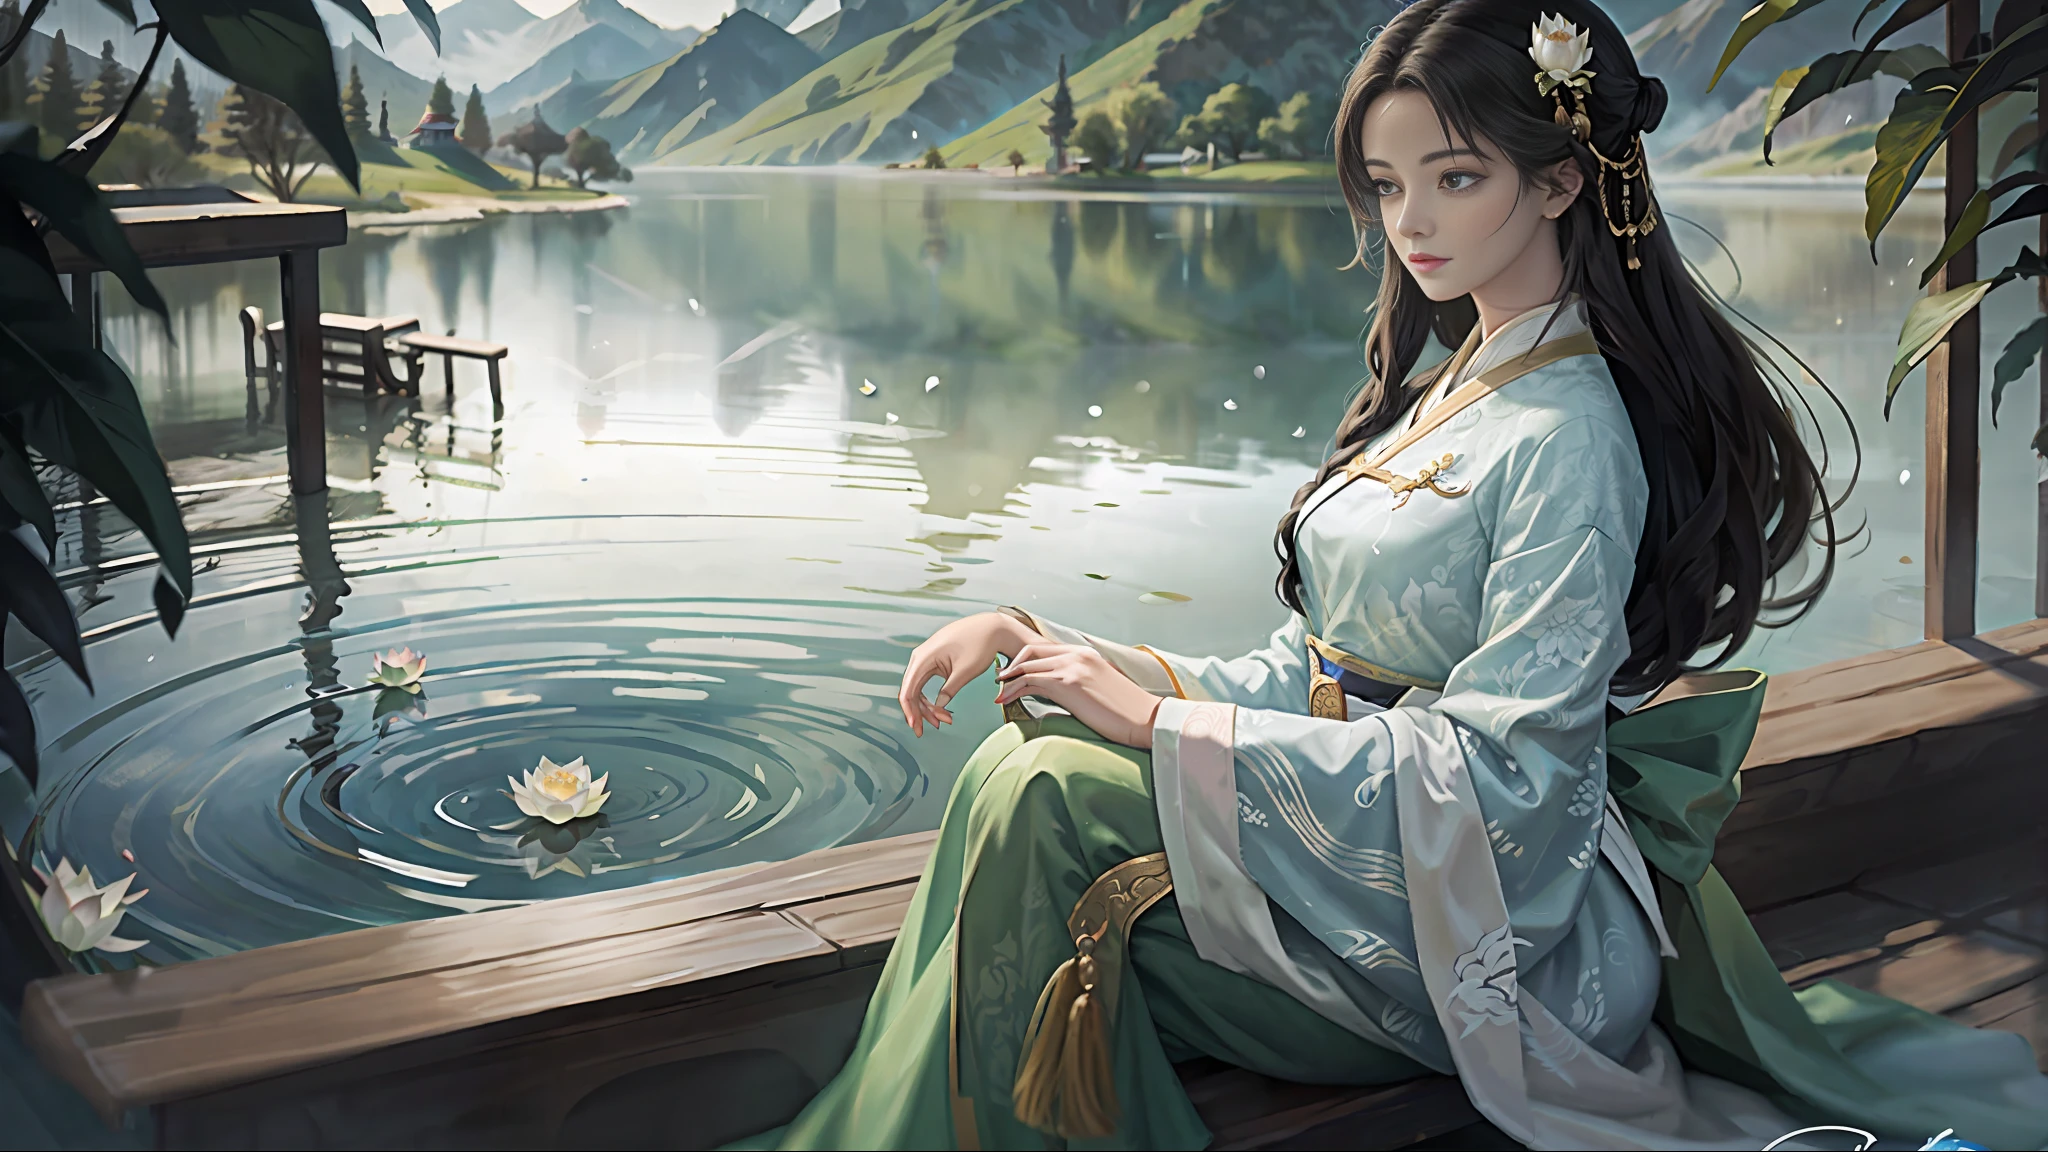 Chinese ancient style, in the pavilion by the lake, a woman wearing traditional Chinese traditional white Hanfu, the woman sits on a chair in the pavilion, the woman looks at the lake, there is a tall tower standing on the surface of the mountain in the background, there are a large number of lotus flowers in the lake, there is a bridge across the lake above the lake, the sky is drizzling, the rain is clearly visible, observe the woman from the side, the woman looks in a trance,